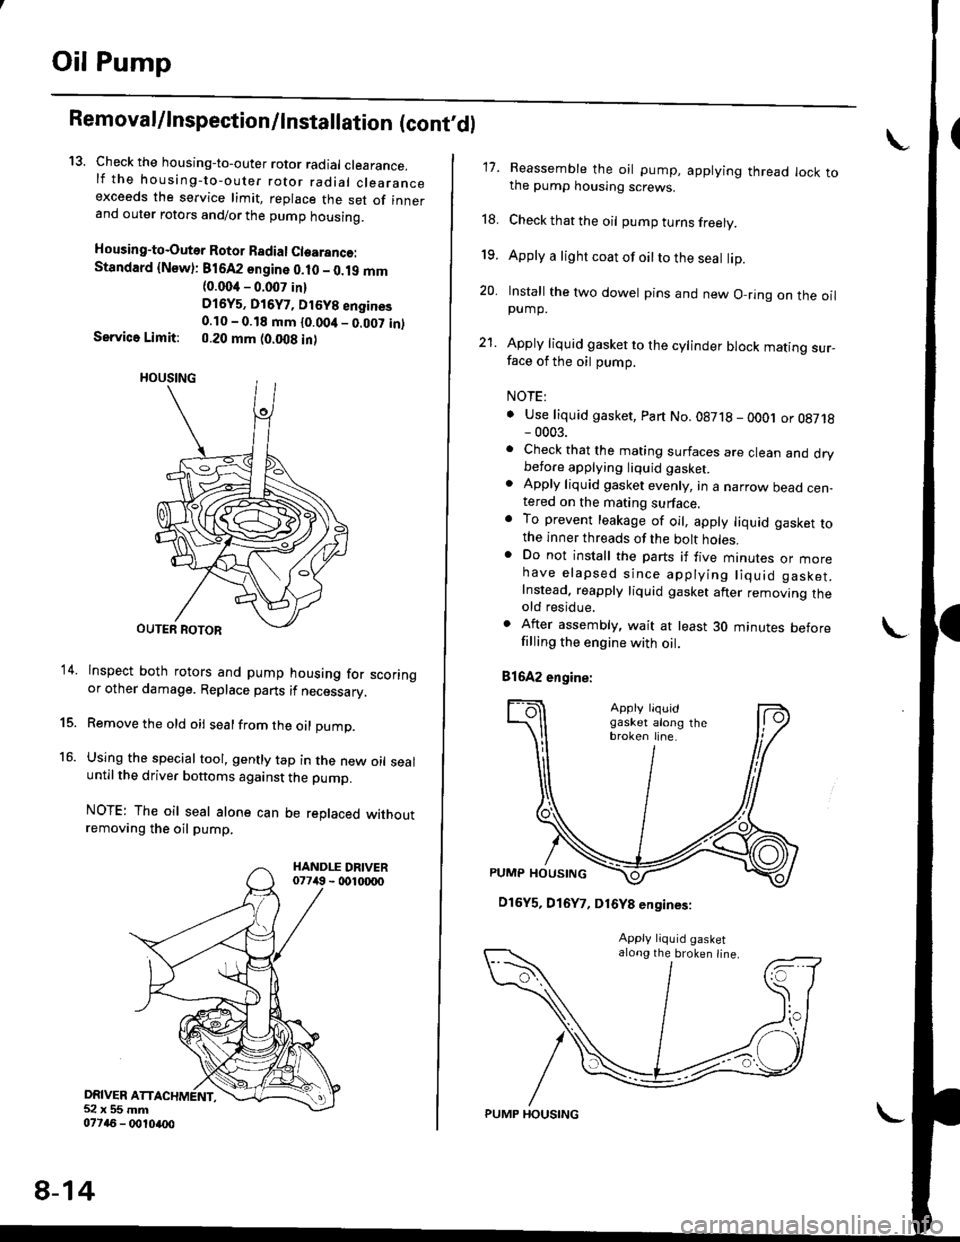 HONDA CIVIC 1998 6.G Workshop Manual Oil Pump
RemovaUlnspection/lnstallation (contdl
13. Check the housing-to-outer rotor radial clearance.lf the housing-to-outer rotor radial clearanceexceeds the service limit, replace the set of inner